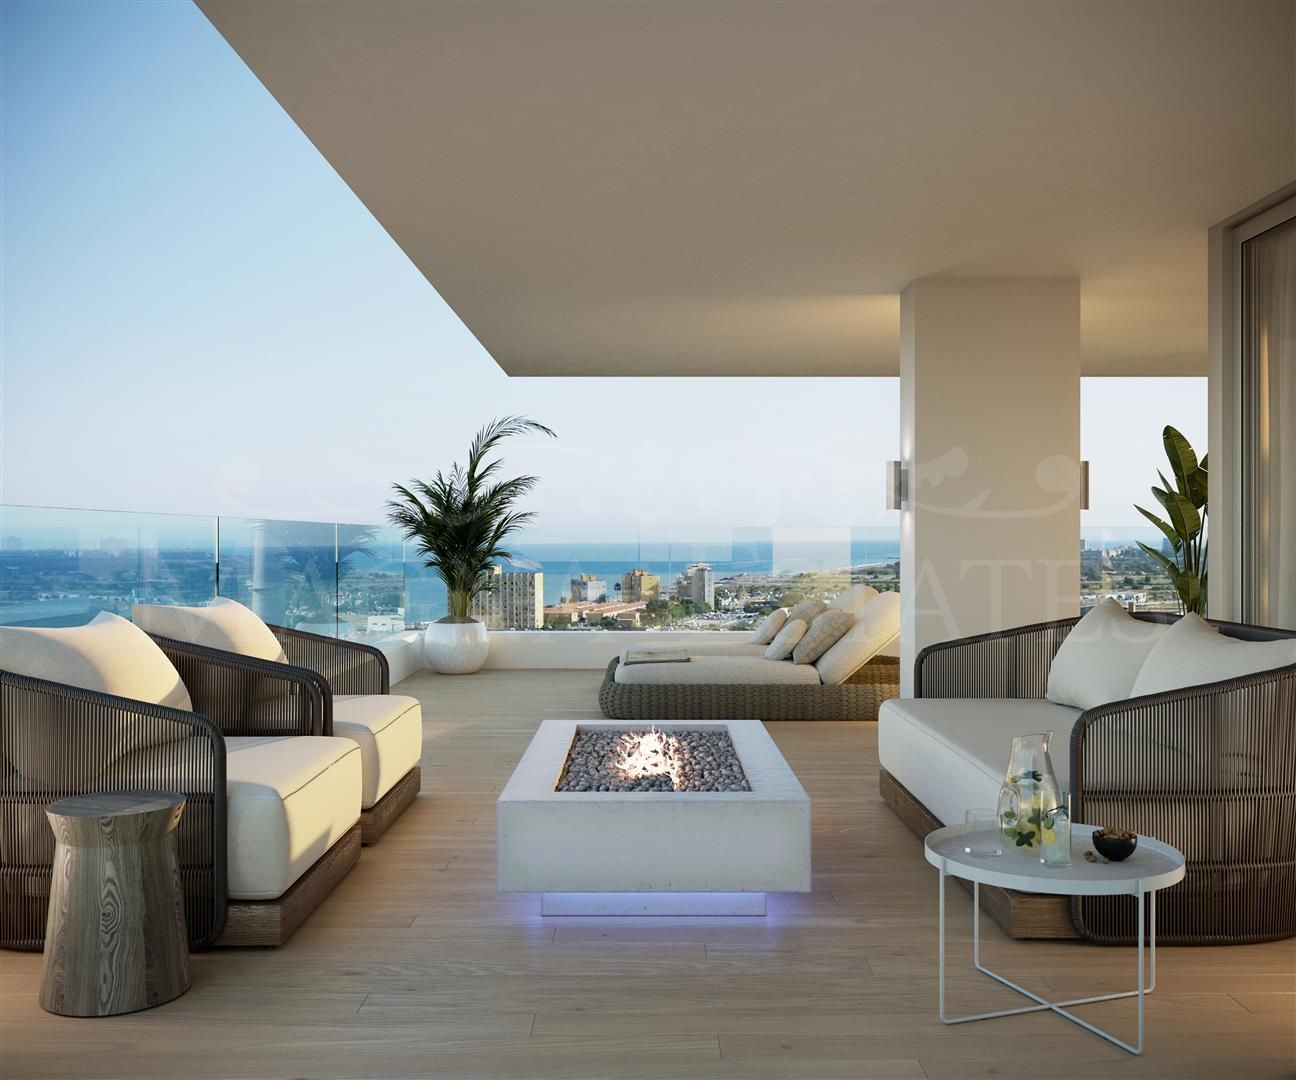 Brand new apartment on the beachfront in Malaga city